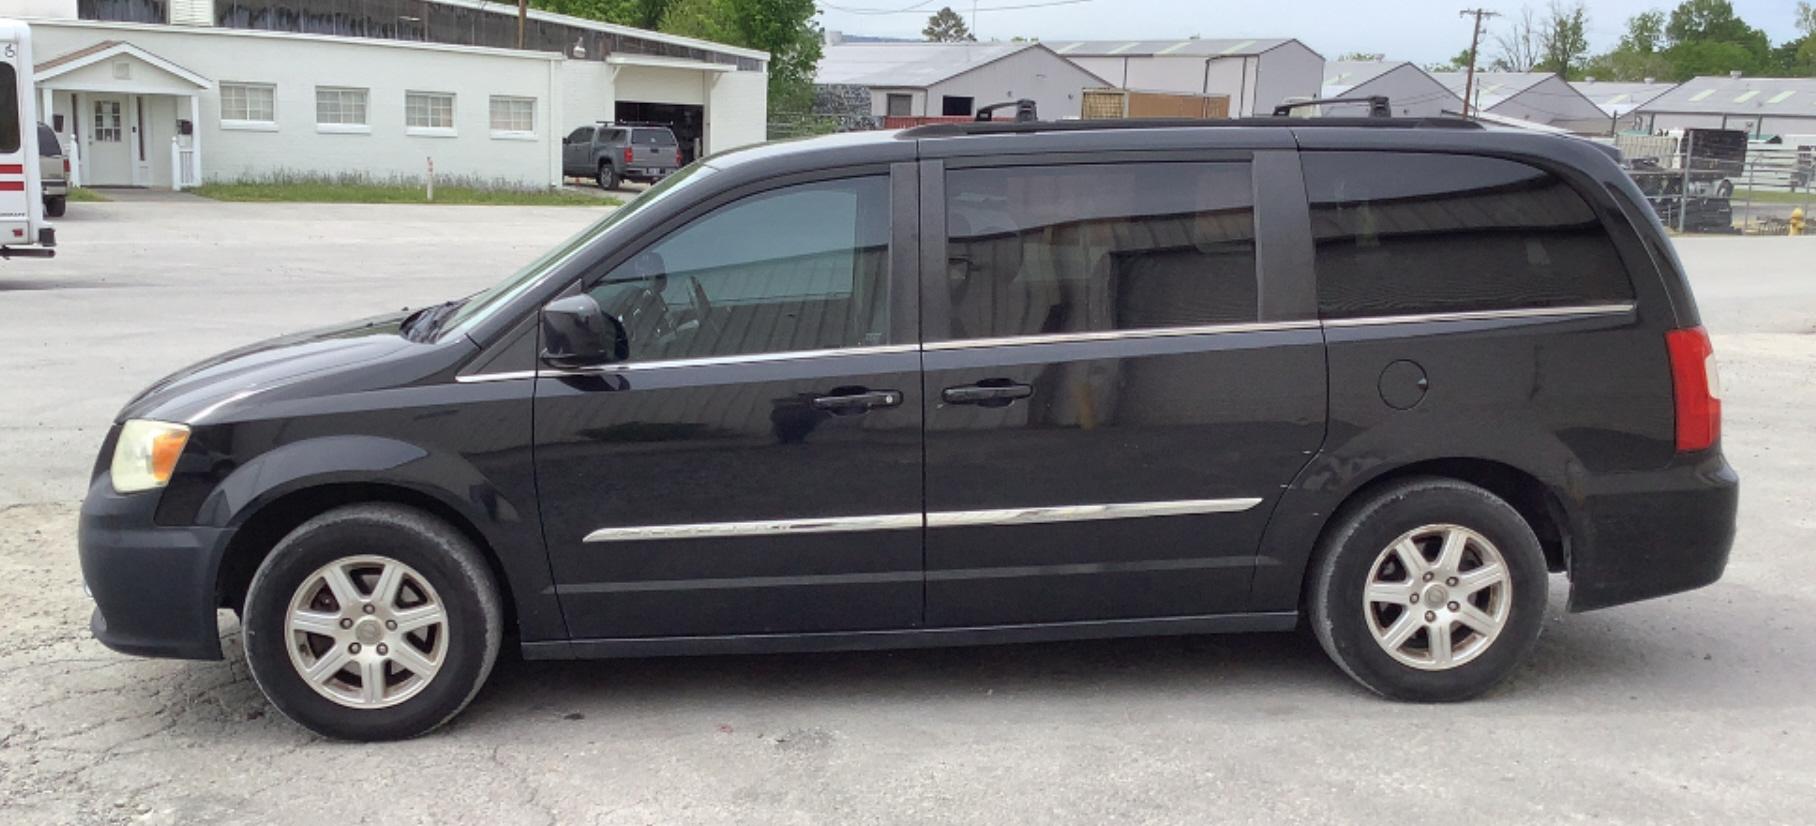 2011 Chrysler Town & Country FWD